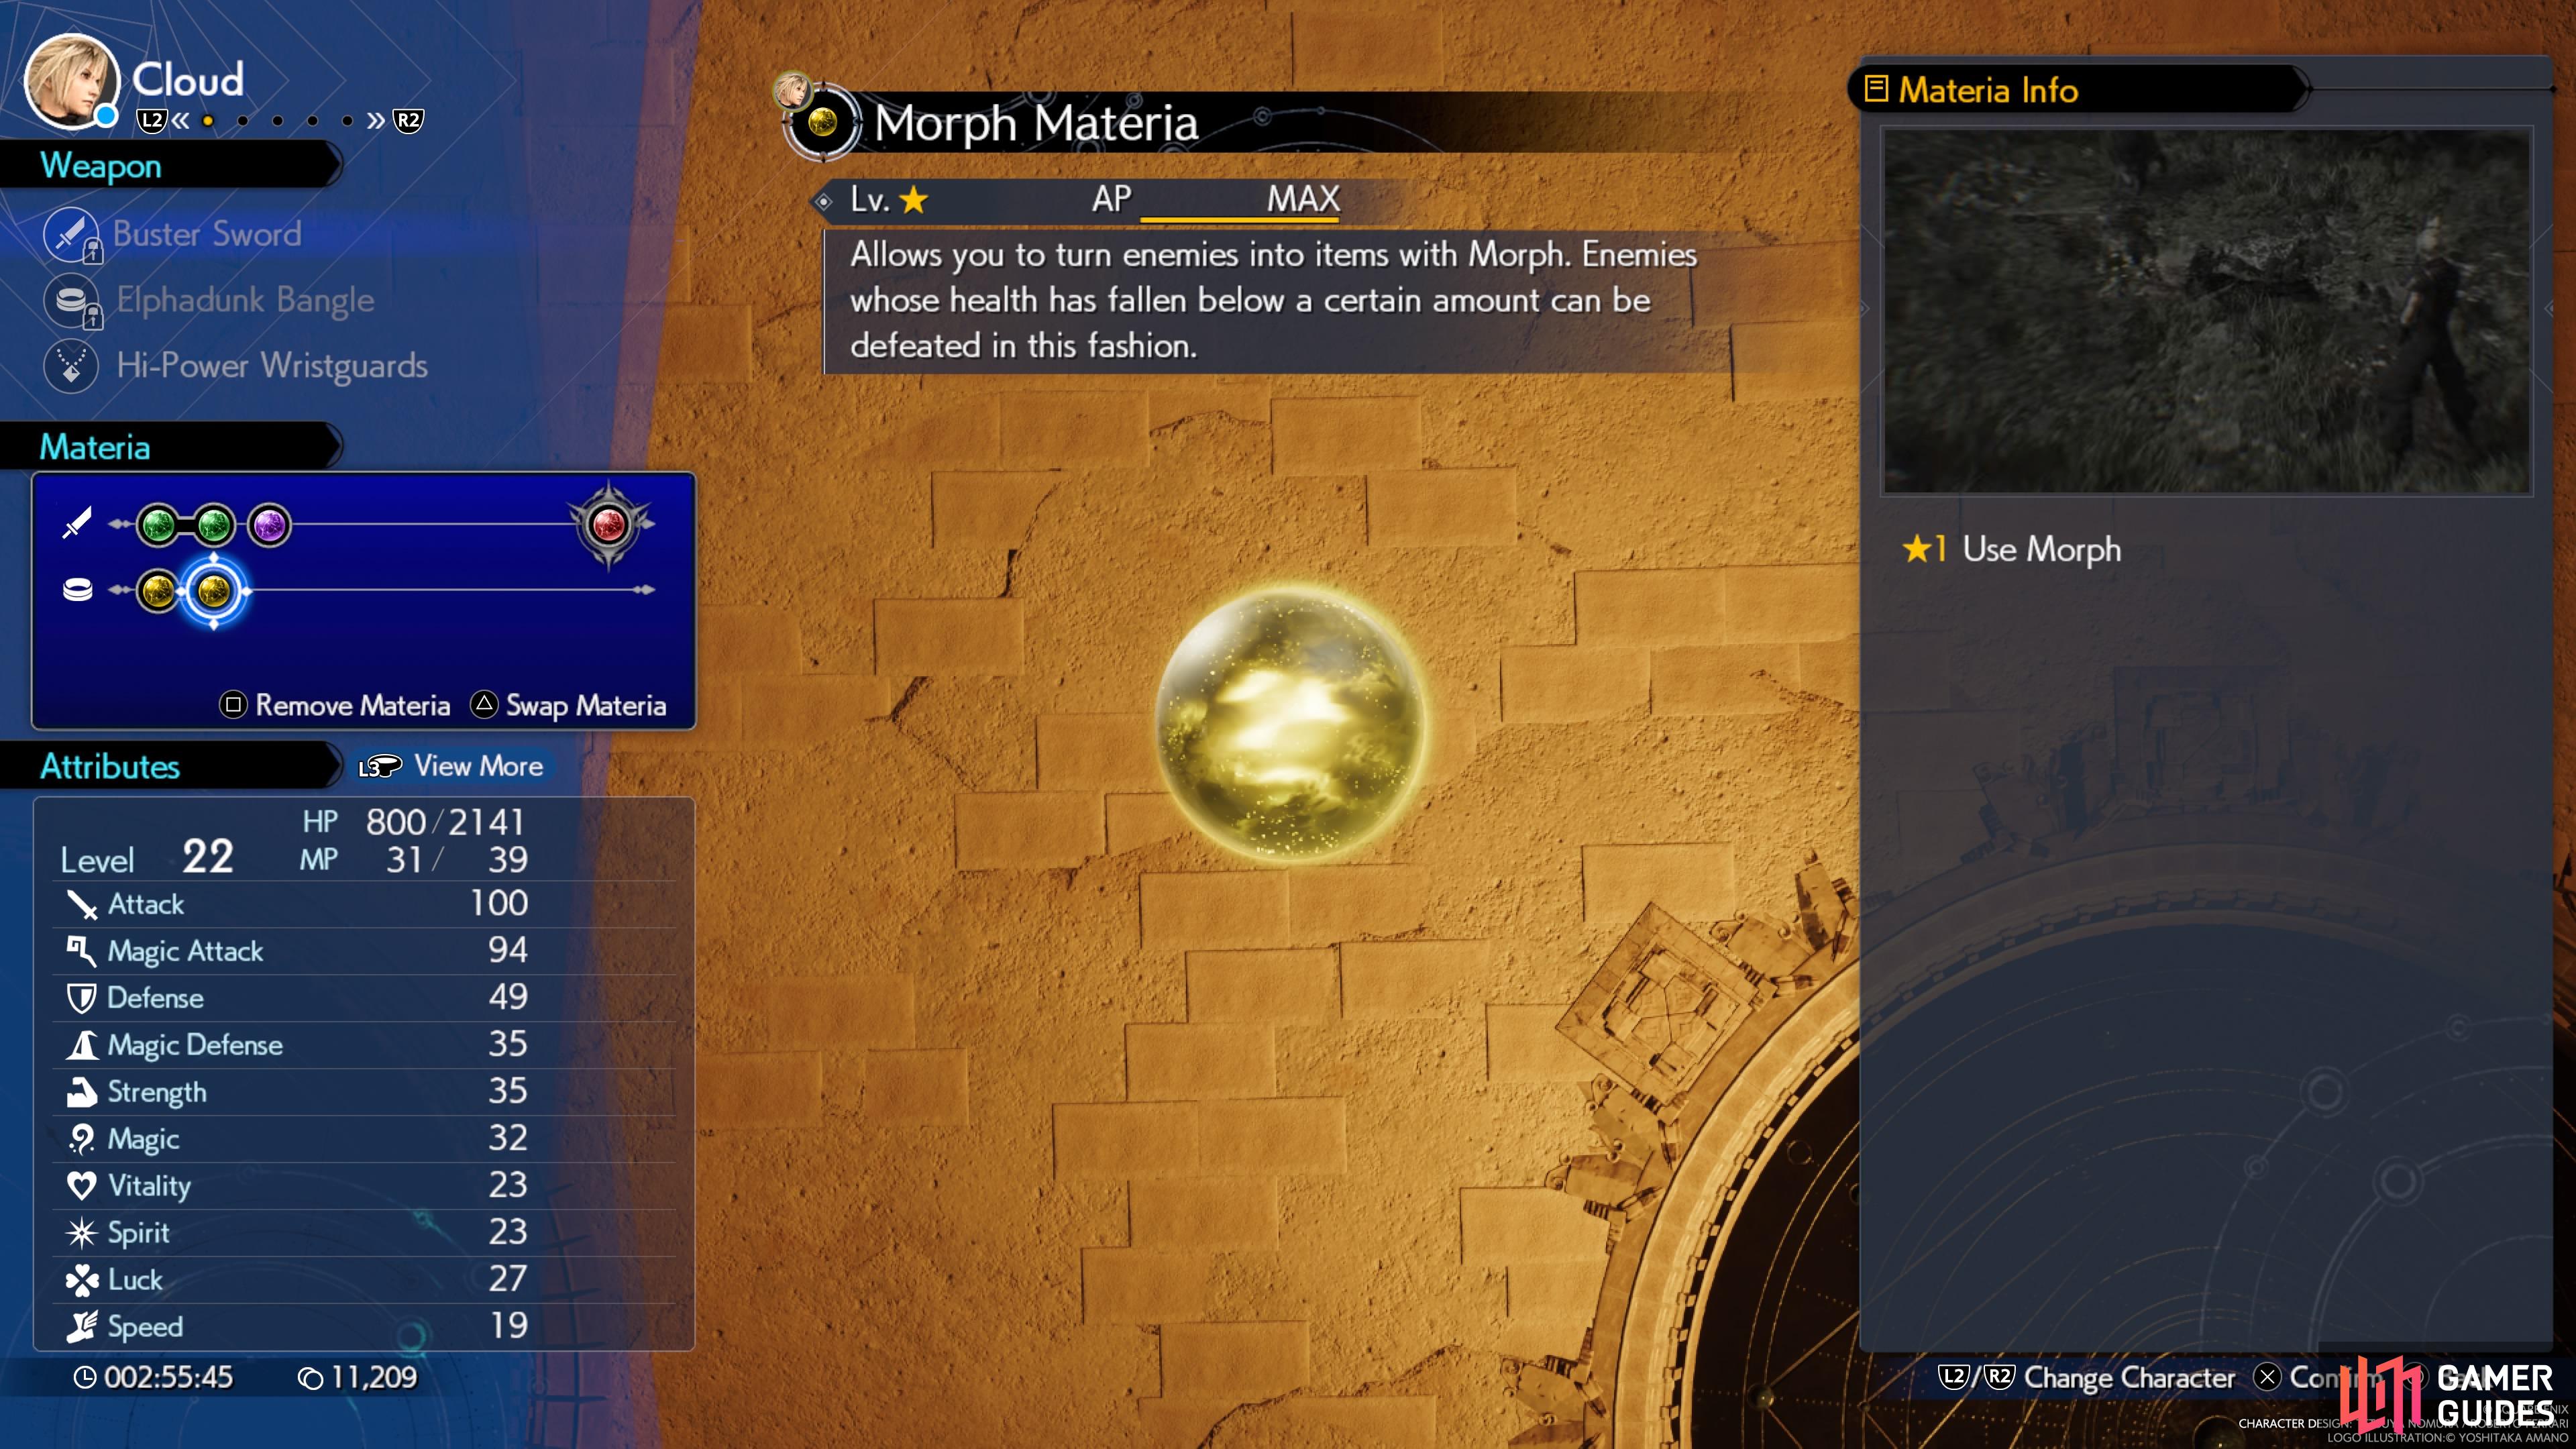 The Morph Materia allows you to turn enemies into items.